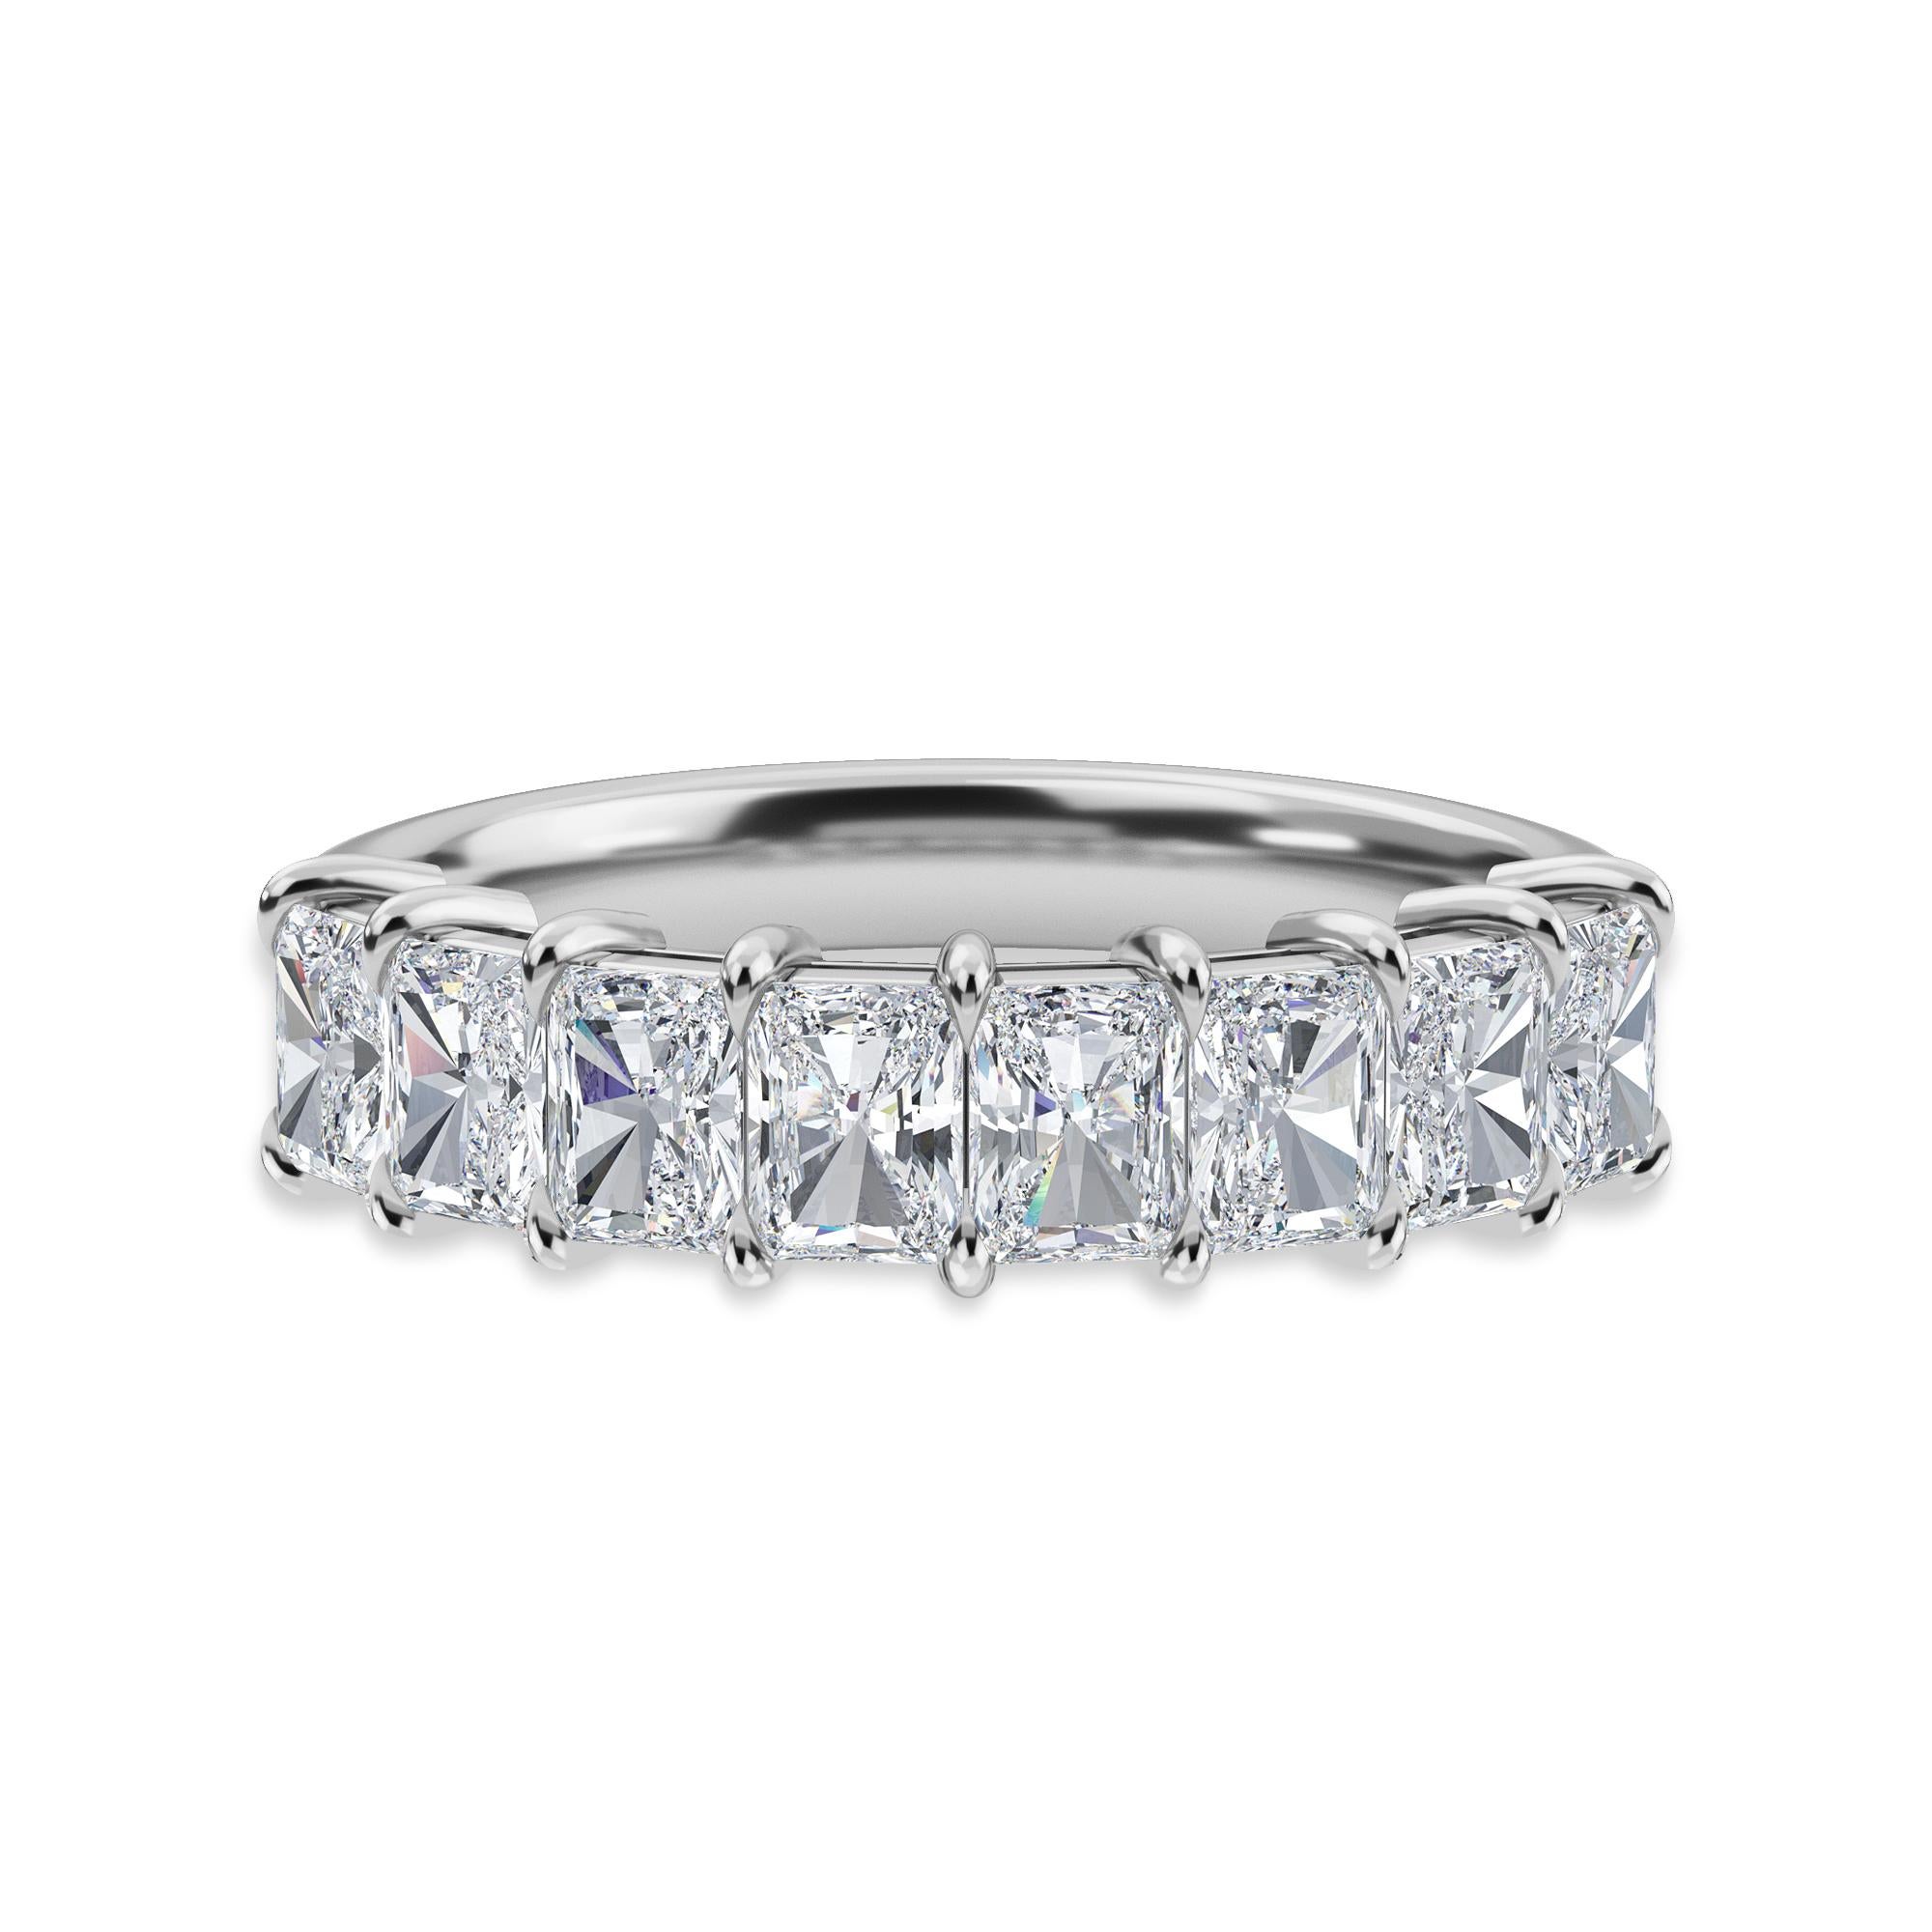 This Ring features 9 Radiant Diamonds with a Total Carat Weight of 1.69.
The diamonds are G-H Color, VS Clarity. The ring is a finger size 6.5 and is set in Platinum.